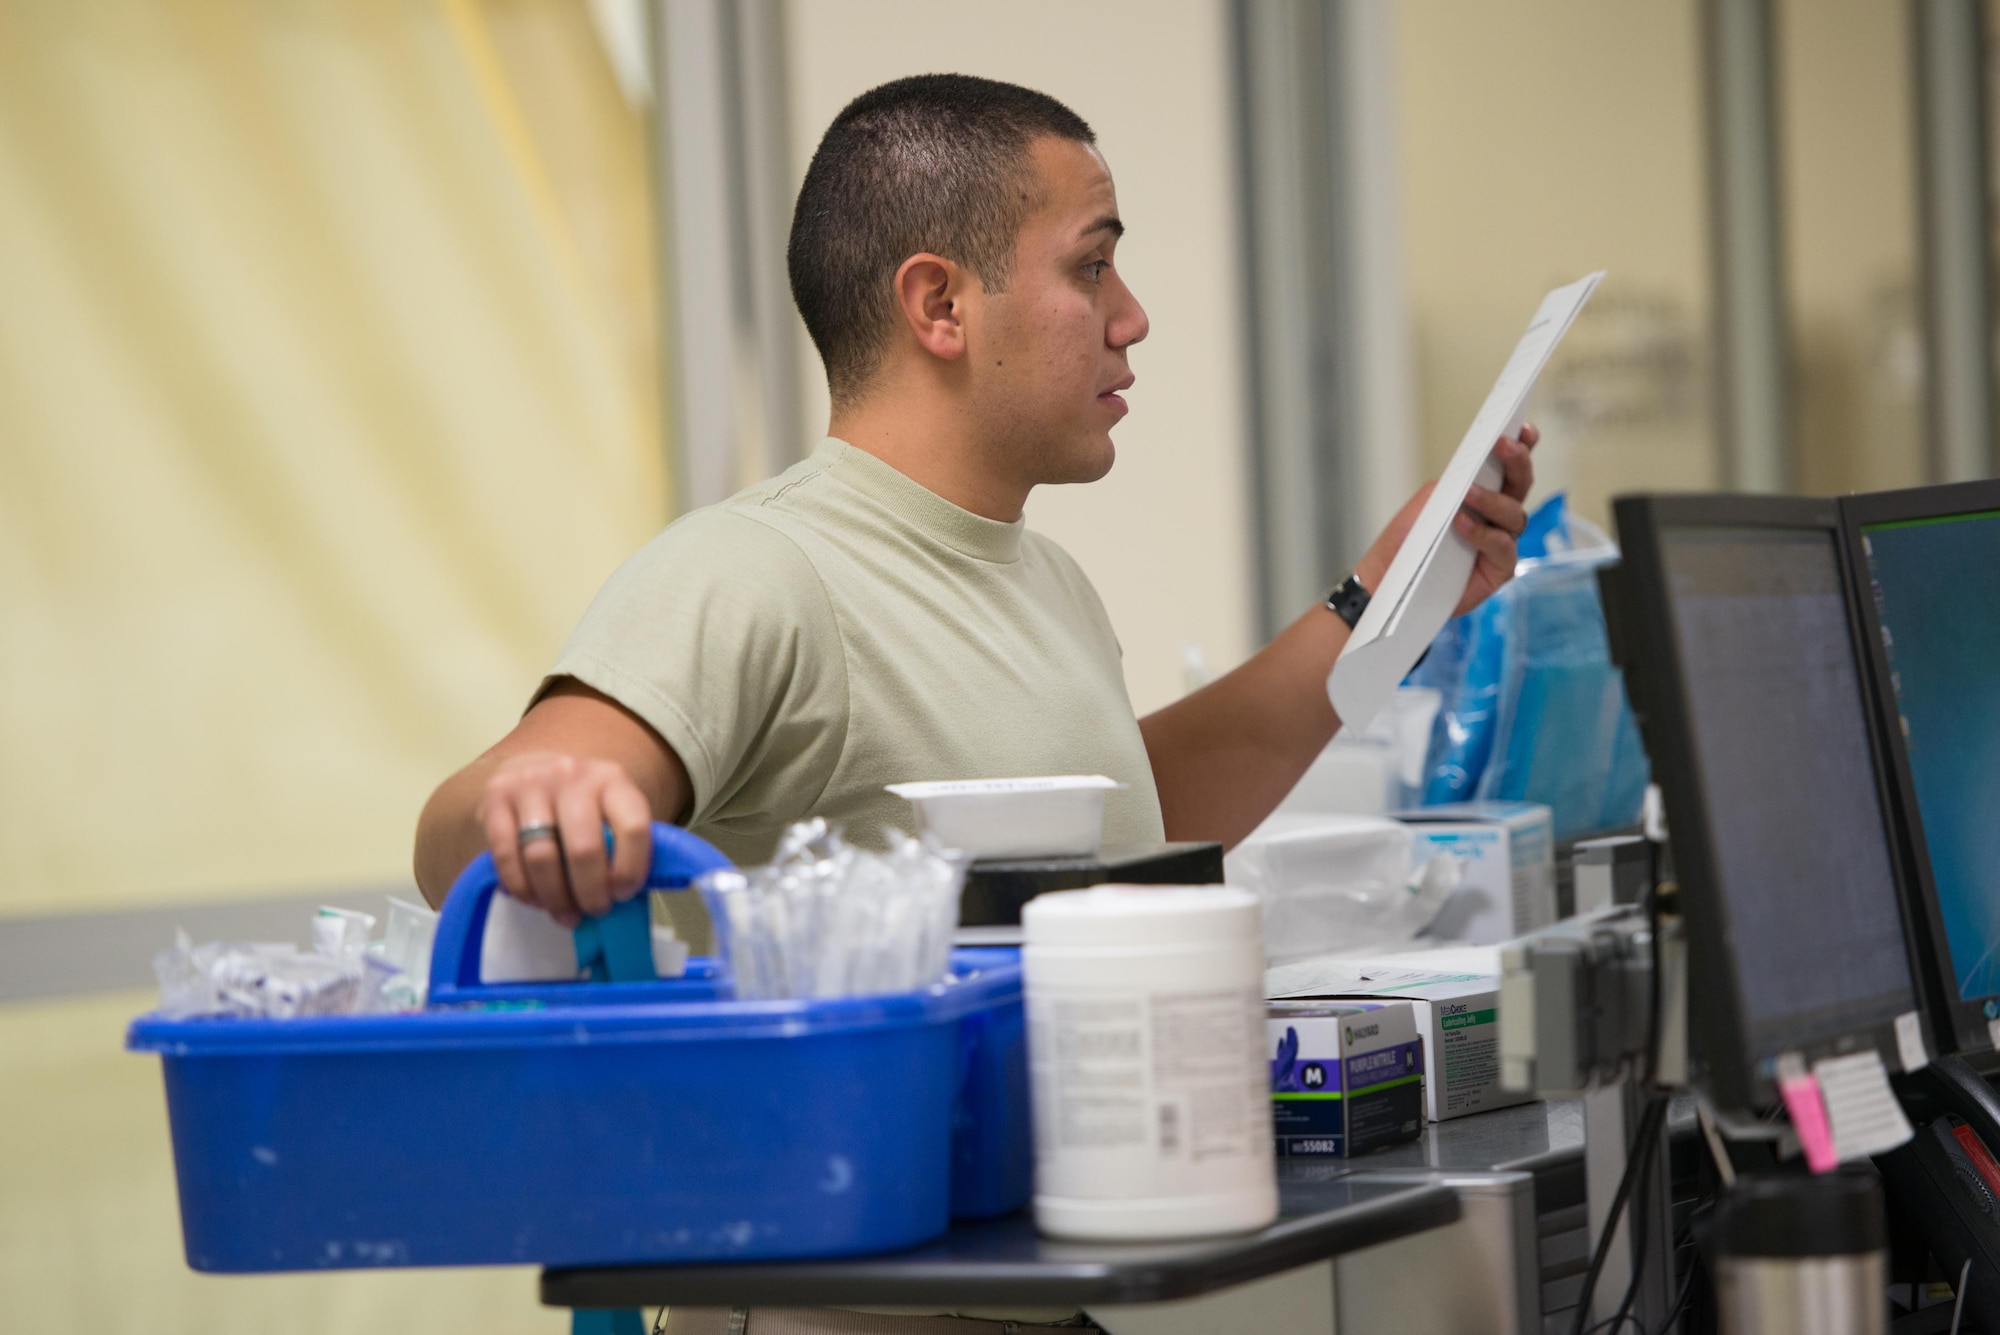 Airman 1st Class Daniel Anchondo, 81st Medical Operations Squadron lab technician, prepares to draw bloodwork from a patient in the emergency services department at the Keesler Medical Center July 1, 2016, on Keesler Air Force Base, Miss. Keesler’s emergency room, which is open 24/7, sees around 2,000 patients monthly and is one of several clinics in the medical center. (U.S. Air Force photo by Marie Floyd/Released)